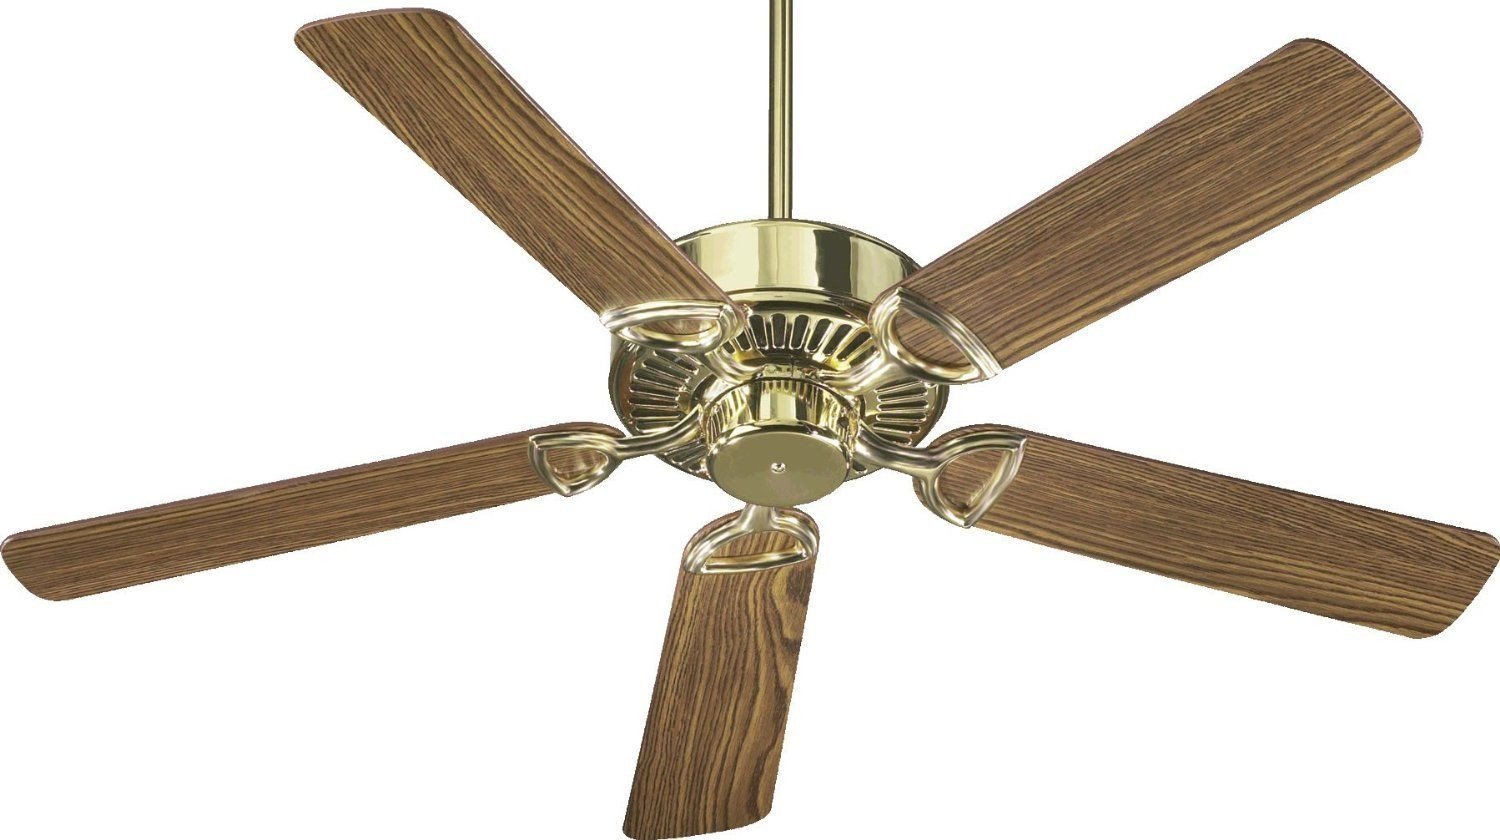 Quorum International 43525-2 Estate Collection Ceiling Fan in Polished Brass Finish